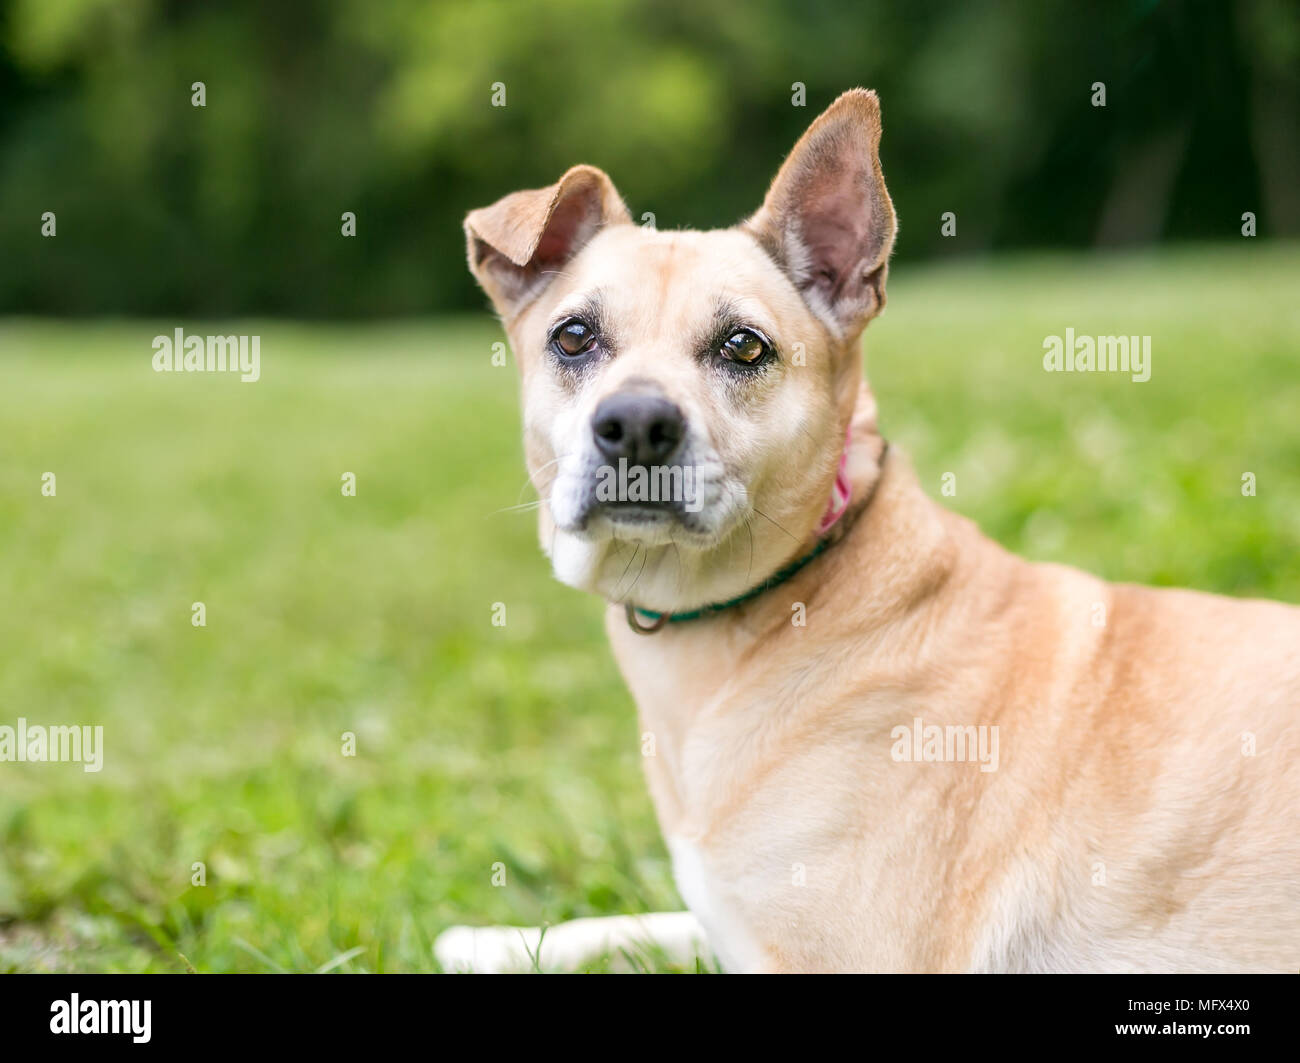 A Terrier mixed breed dog with one floppy ear and one straight ear Stock Photo